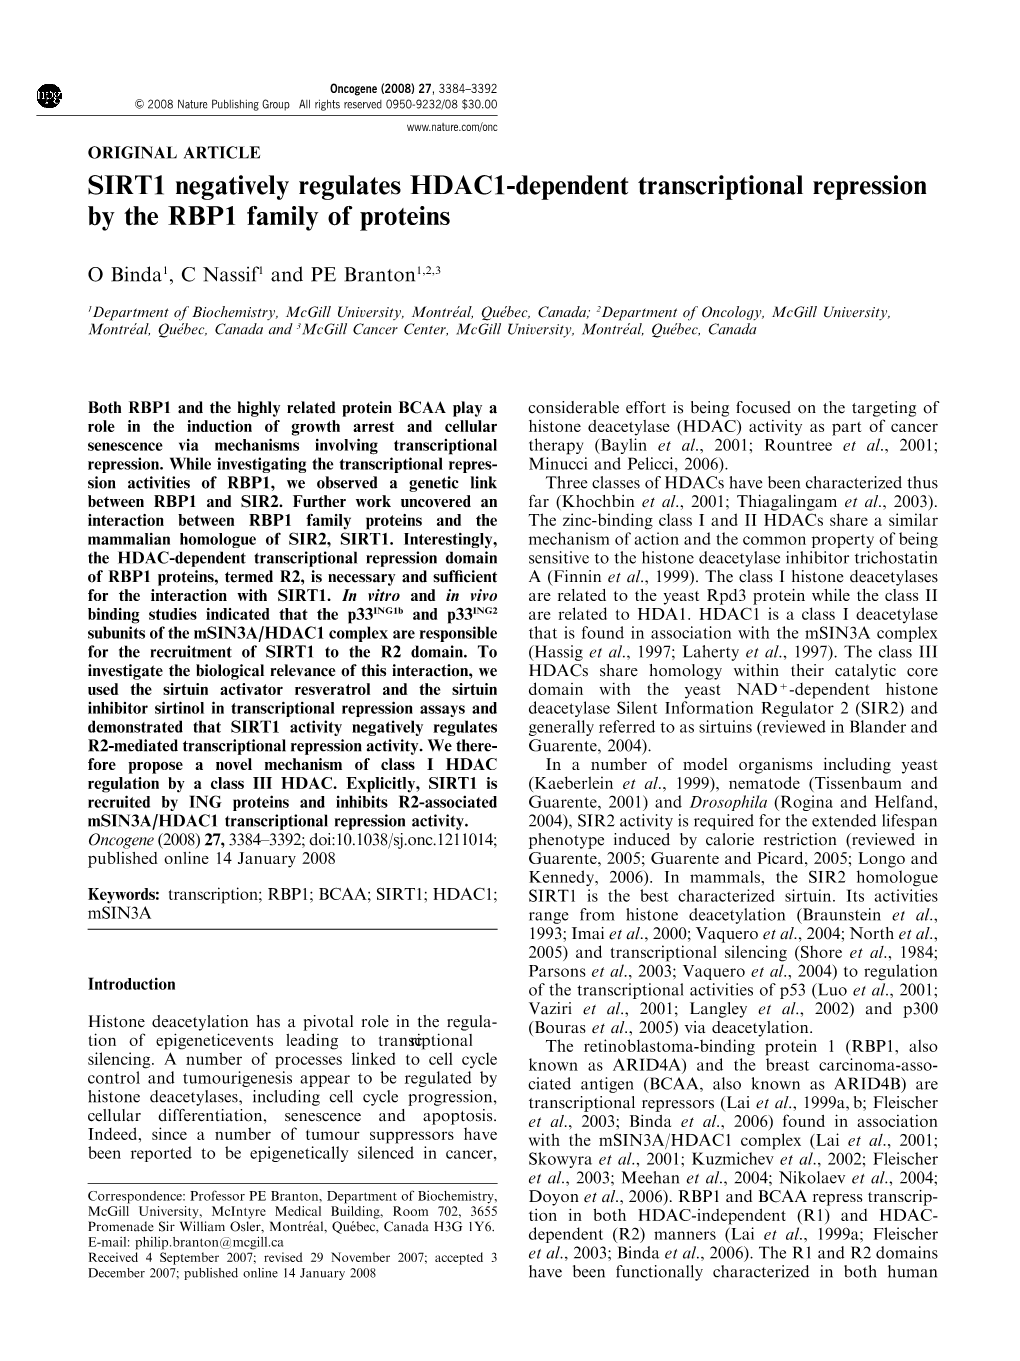 SIRT1 Negatively Regulates HDAC1-Dependent Transcriptional Repression by the RBP1 Family of Proteins